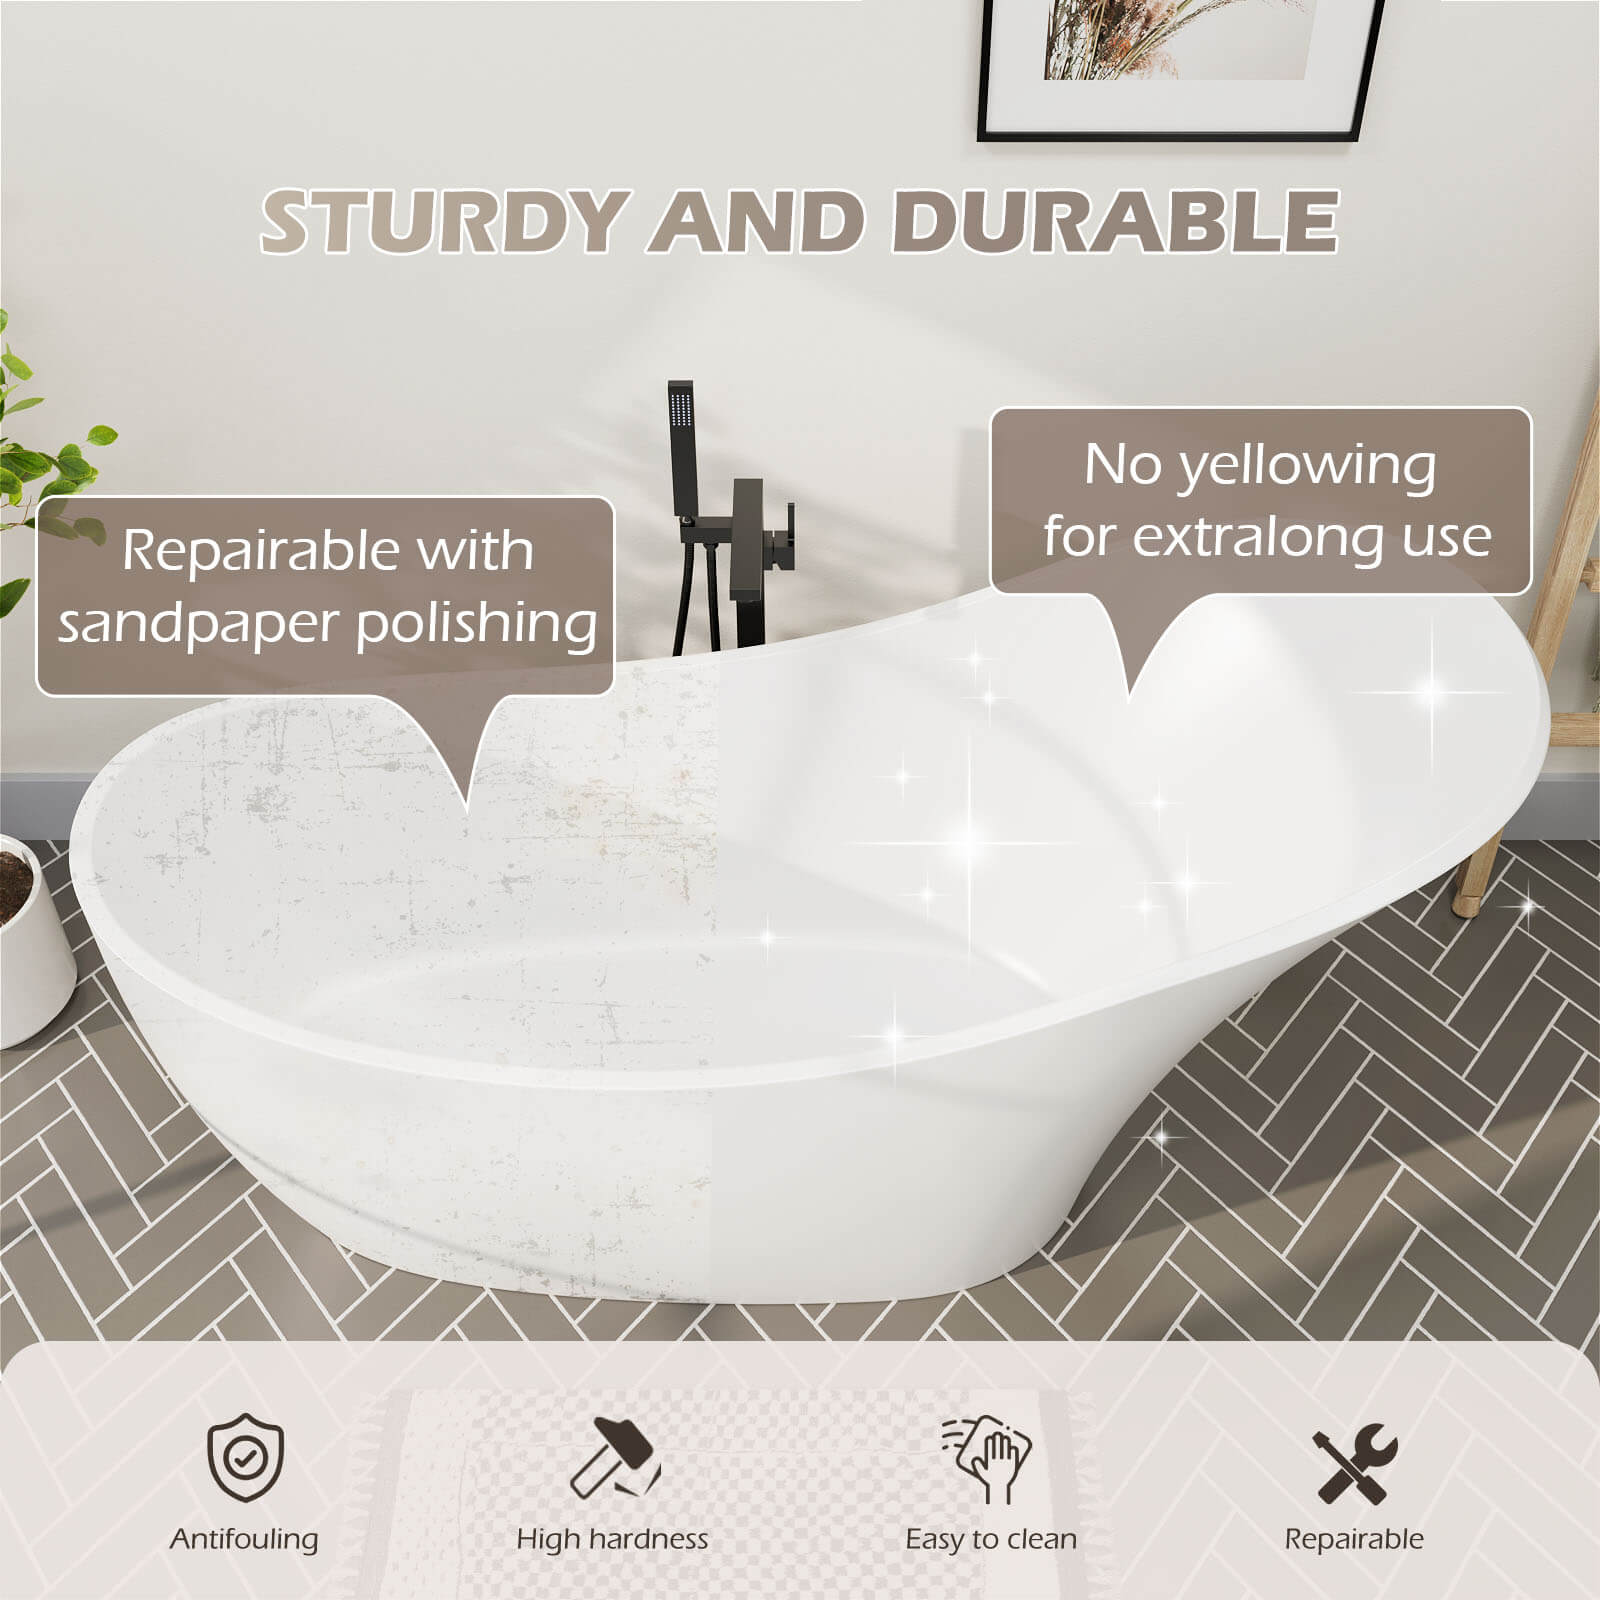 Solid-surface 66-inch single slipper bathtub with backrest makes cleaning easier